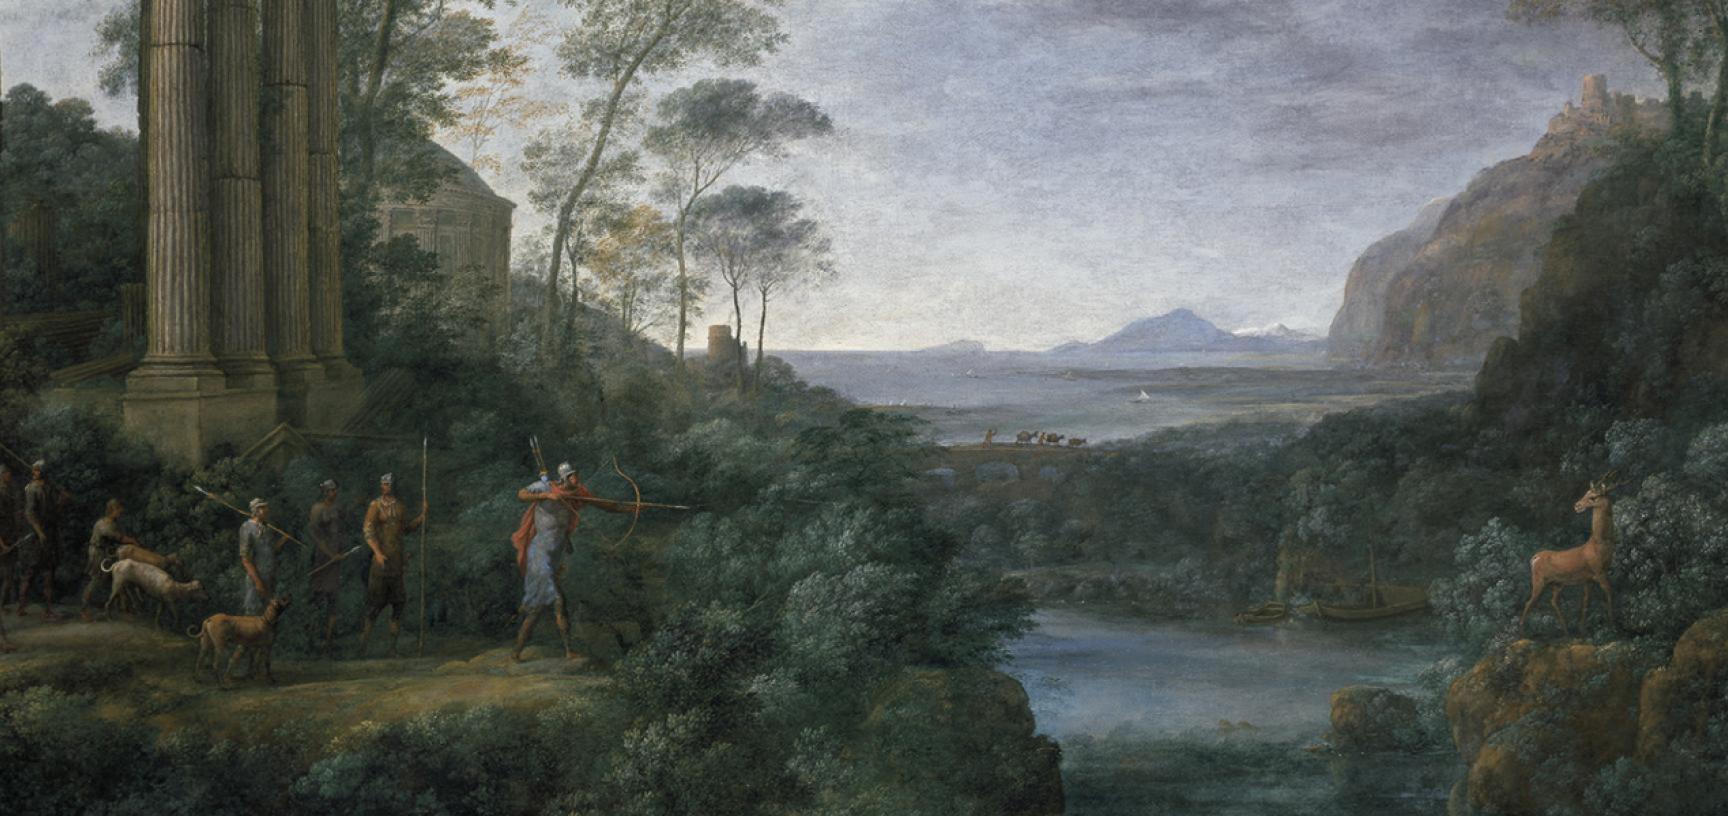 Landscape with Ascanius Shooting the Stag of Sylvia by Claude Lorrain (c.1604/5-1682) - The Baroque Art Gallery at the Ashmolean Museum